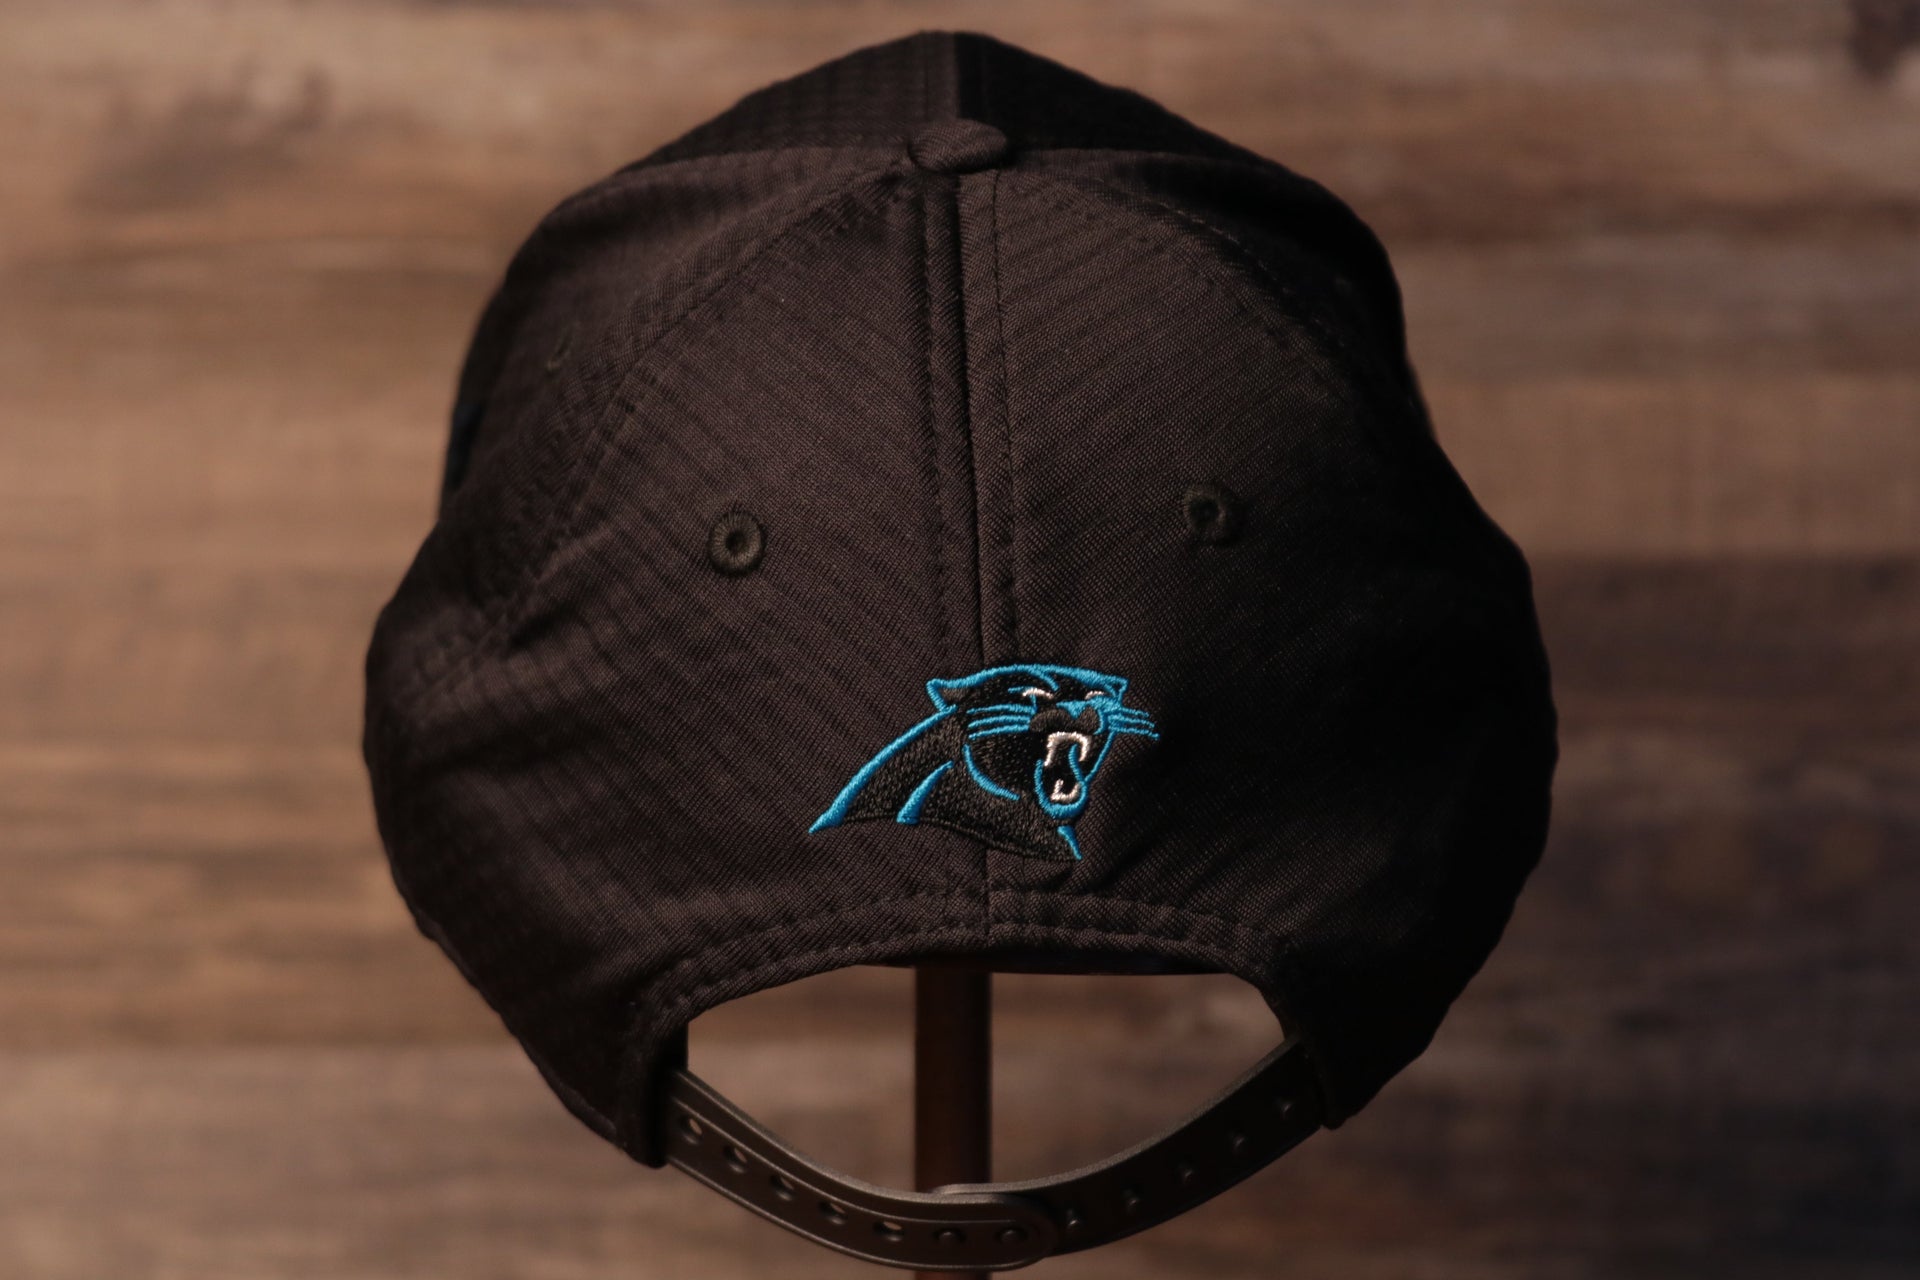 Panthers 2020 Training Camp Snapback Hat | Carolina Panthers 2020 On-Field Black Training Camp Snap Cap the back side has the panthers logo right above the adjustable snap